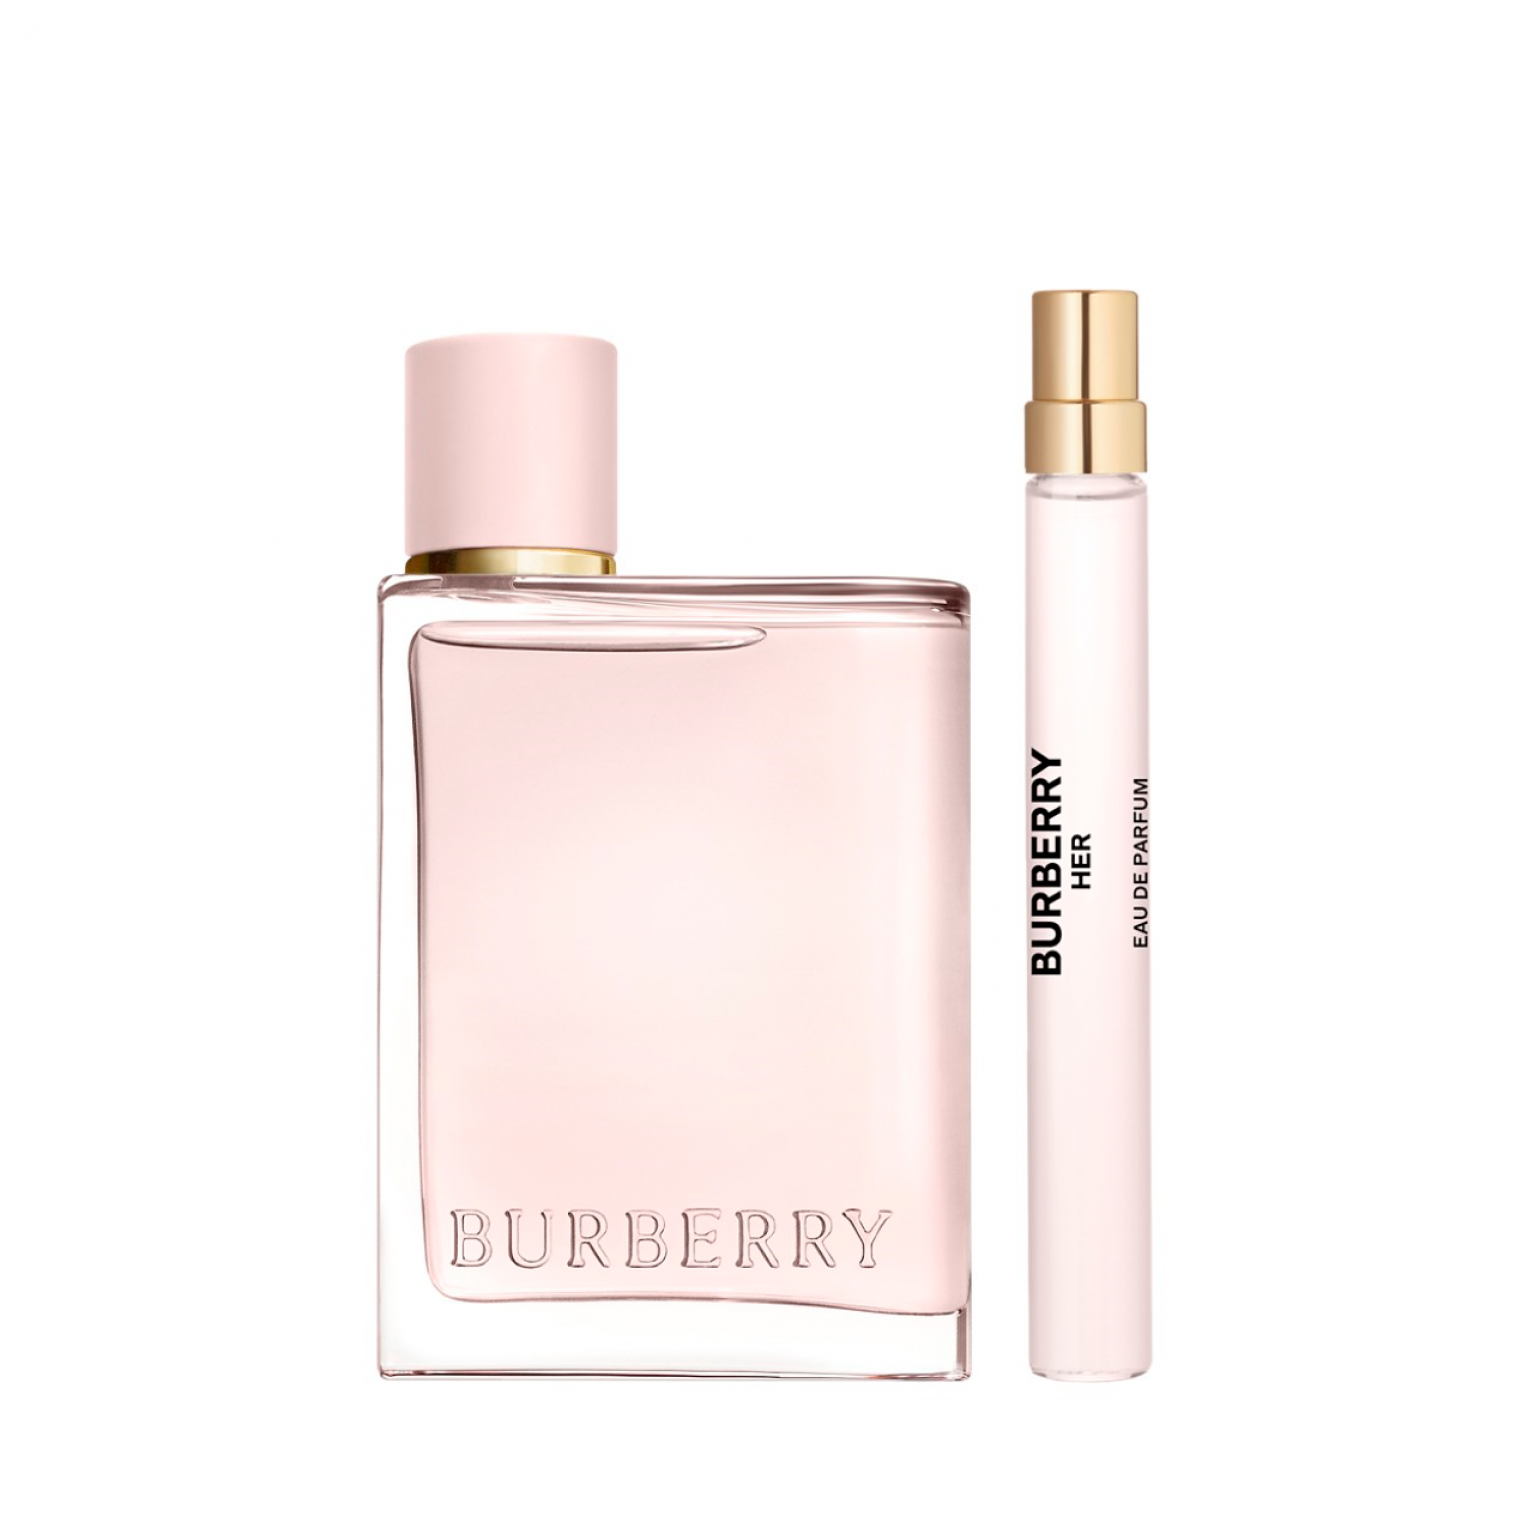 Schiphol | Gift sets - Burberry Burberry Her set